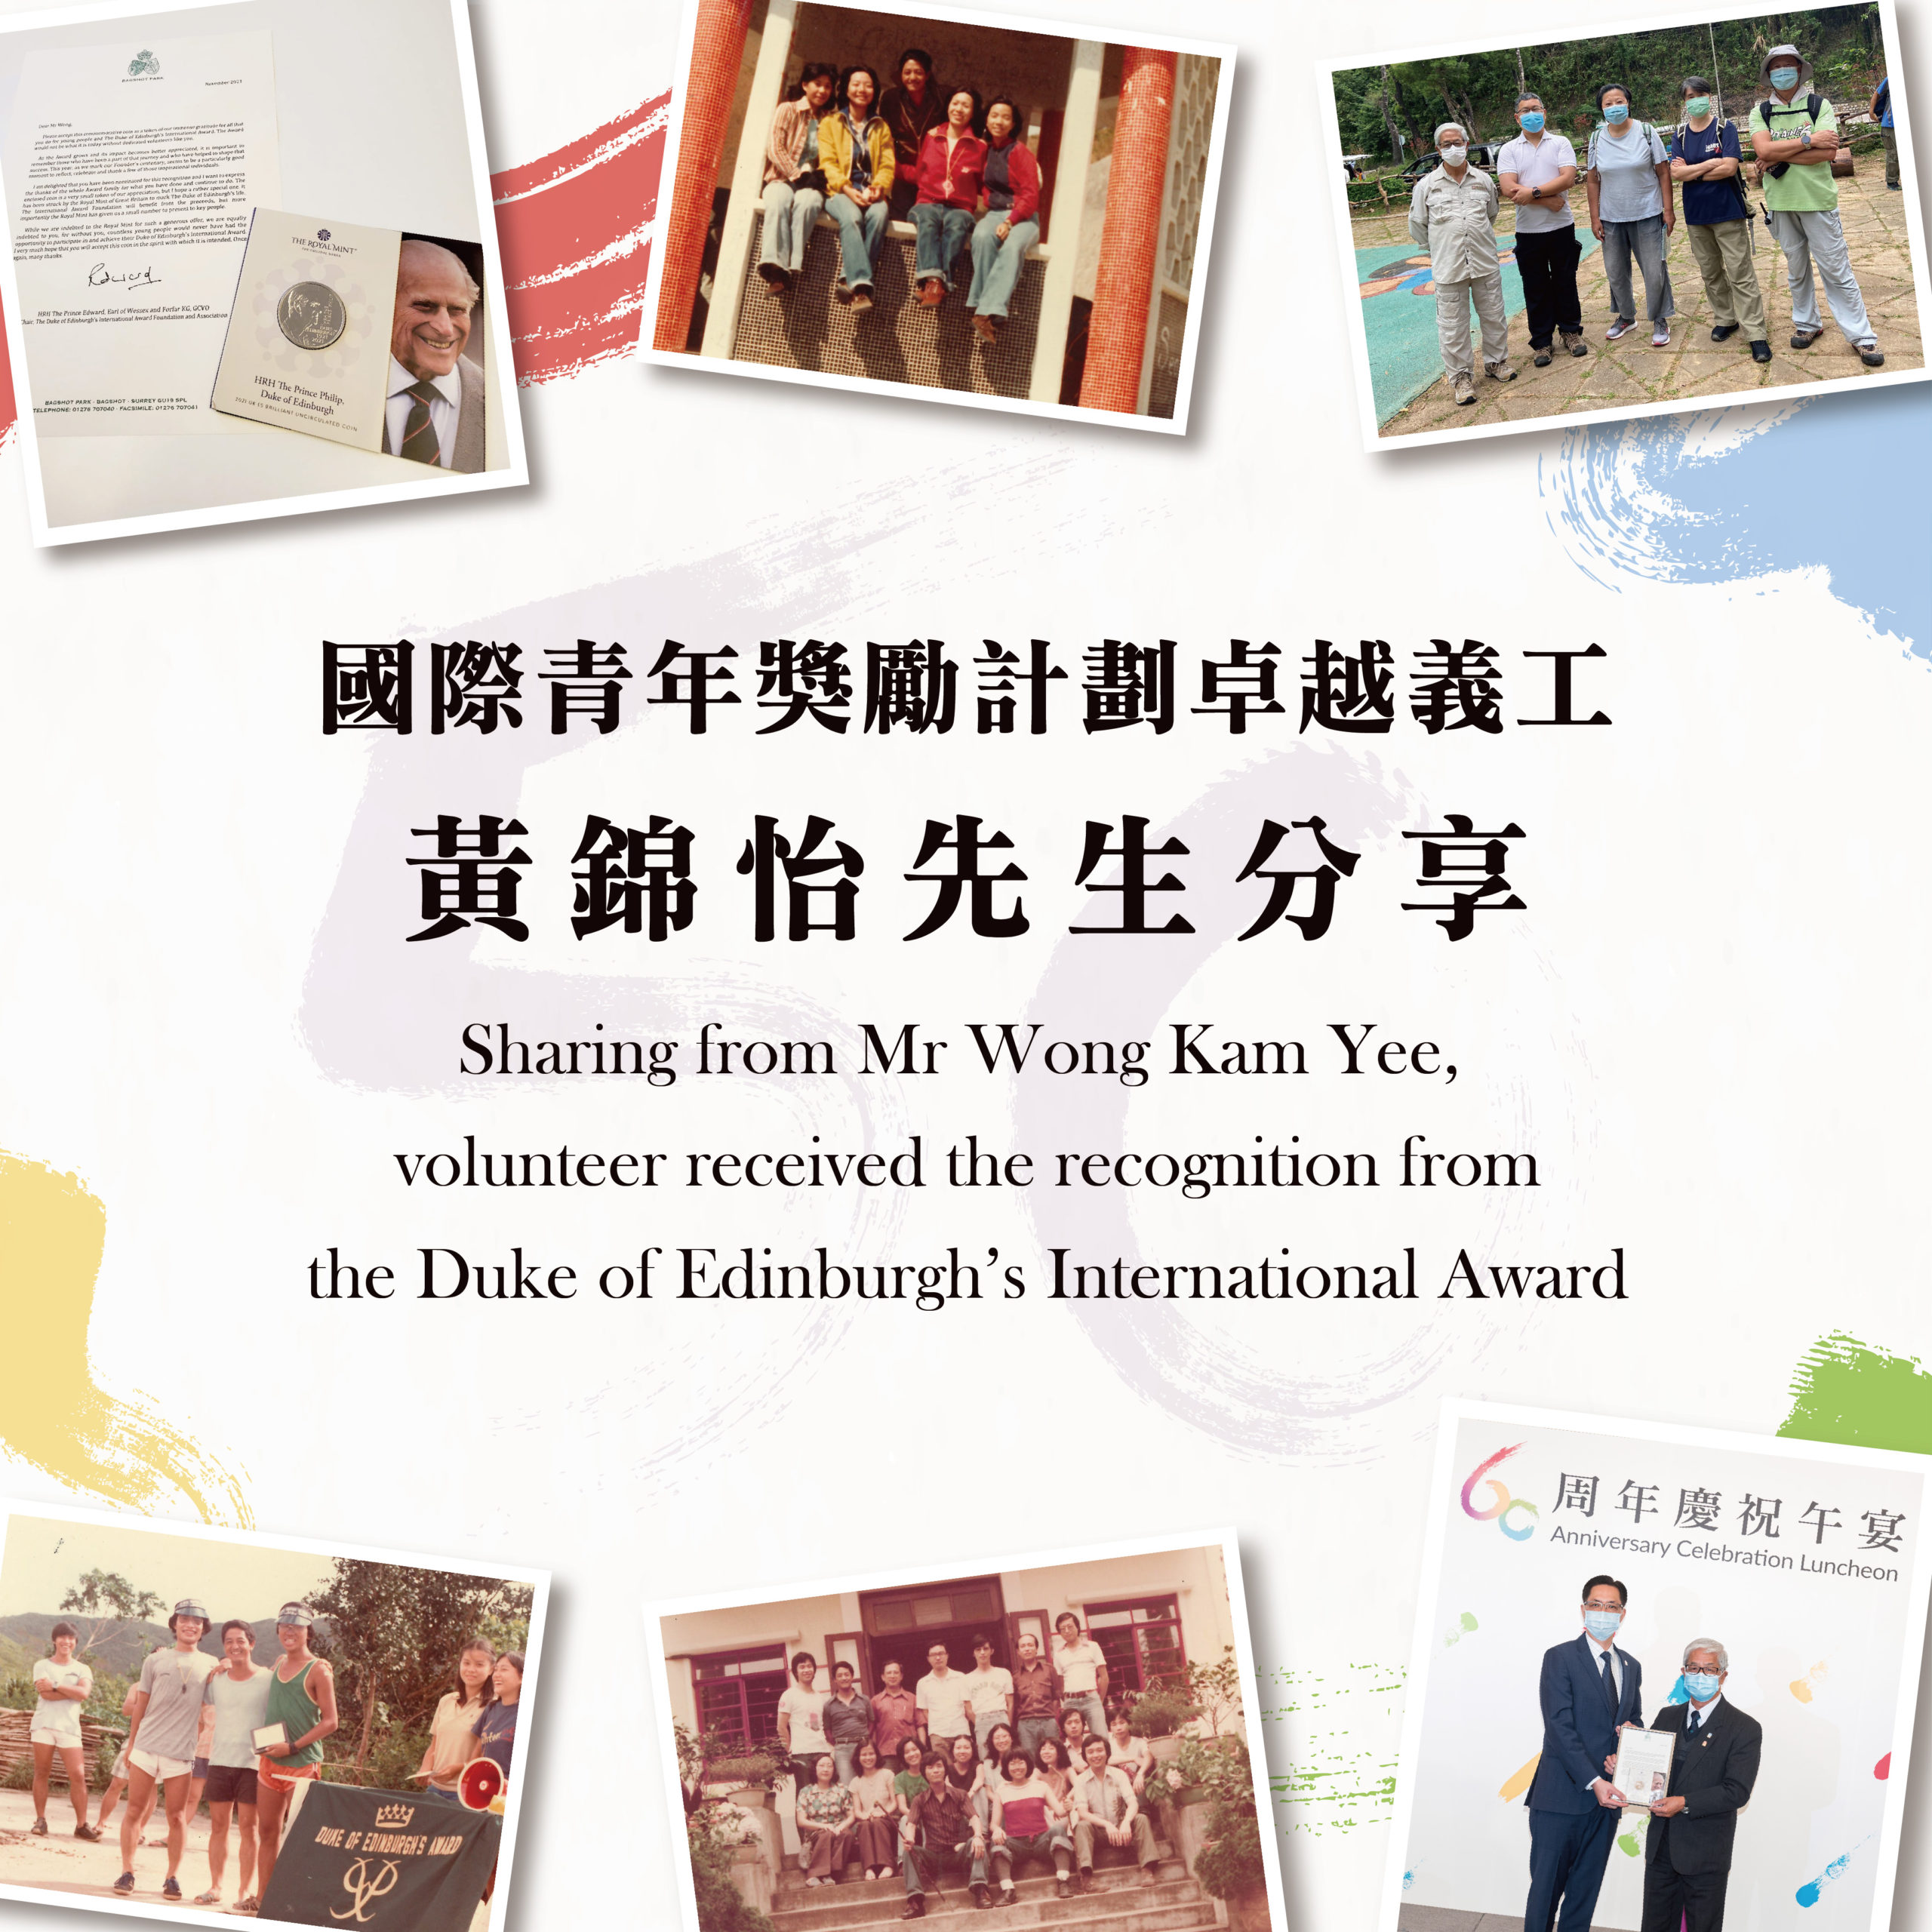 January 2022: Sharing from Mr. Wong Kam Yee, volunteer received the recognition from the Duke of Edinburgh’s International Award